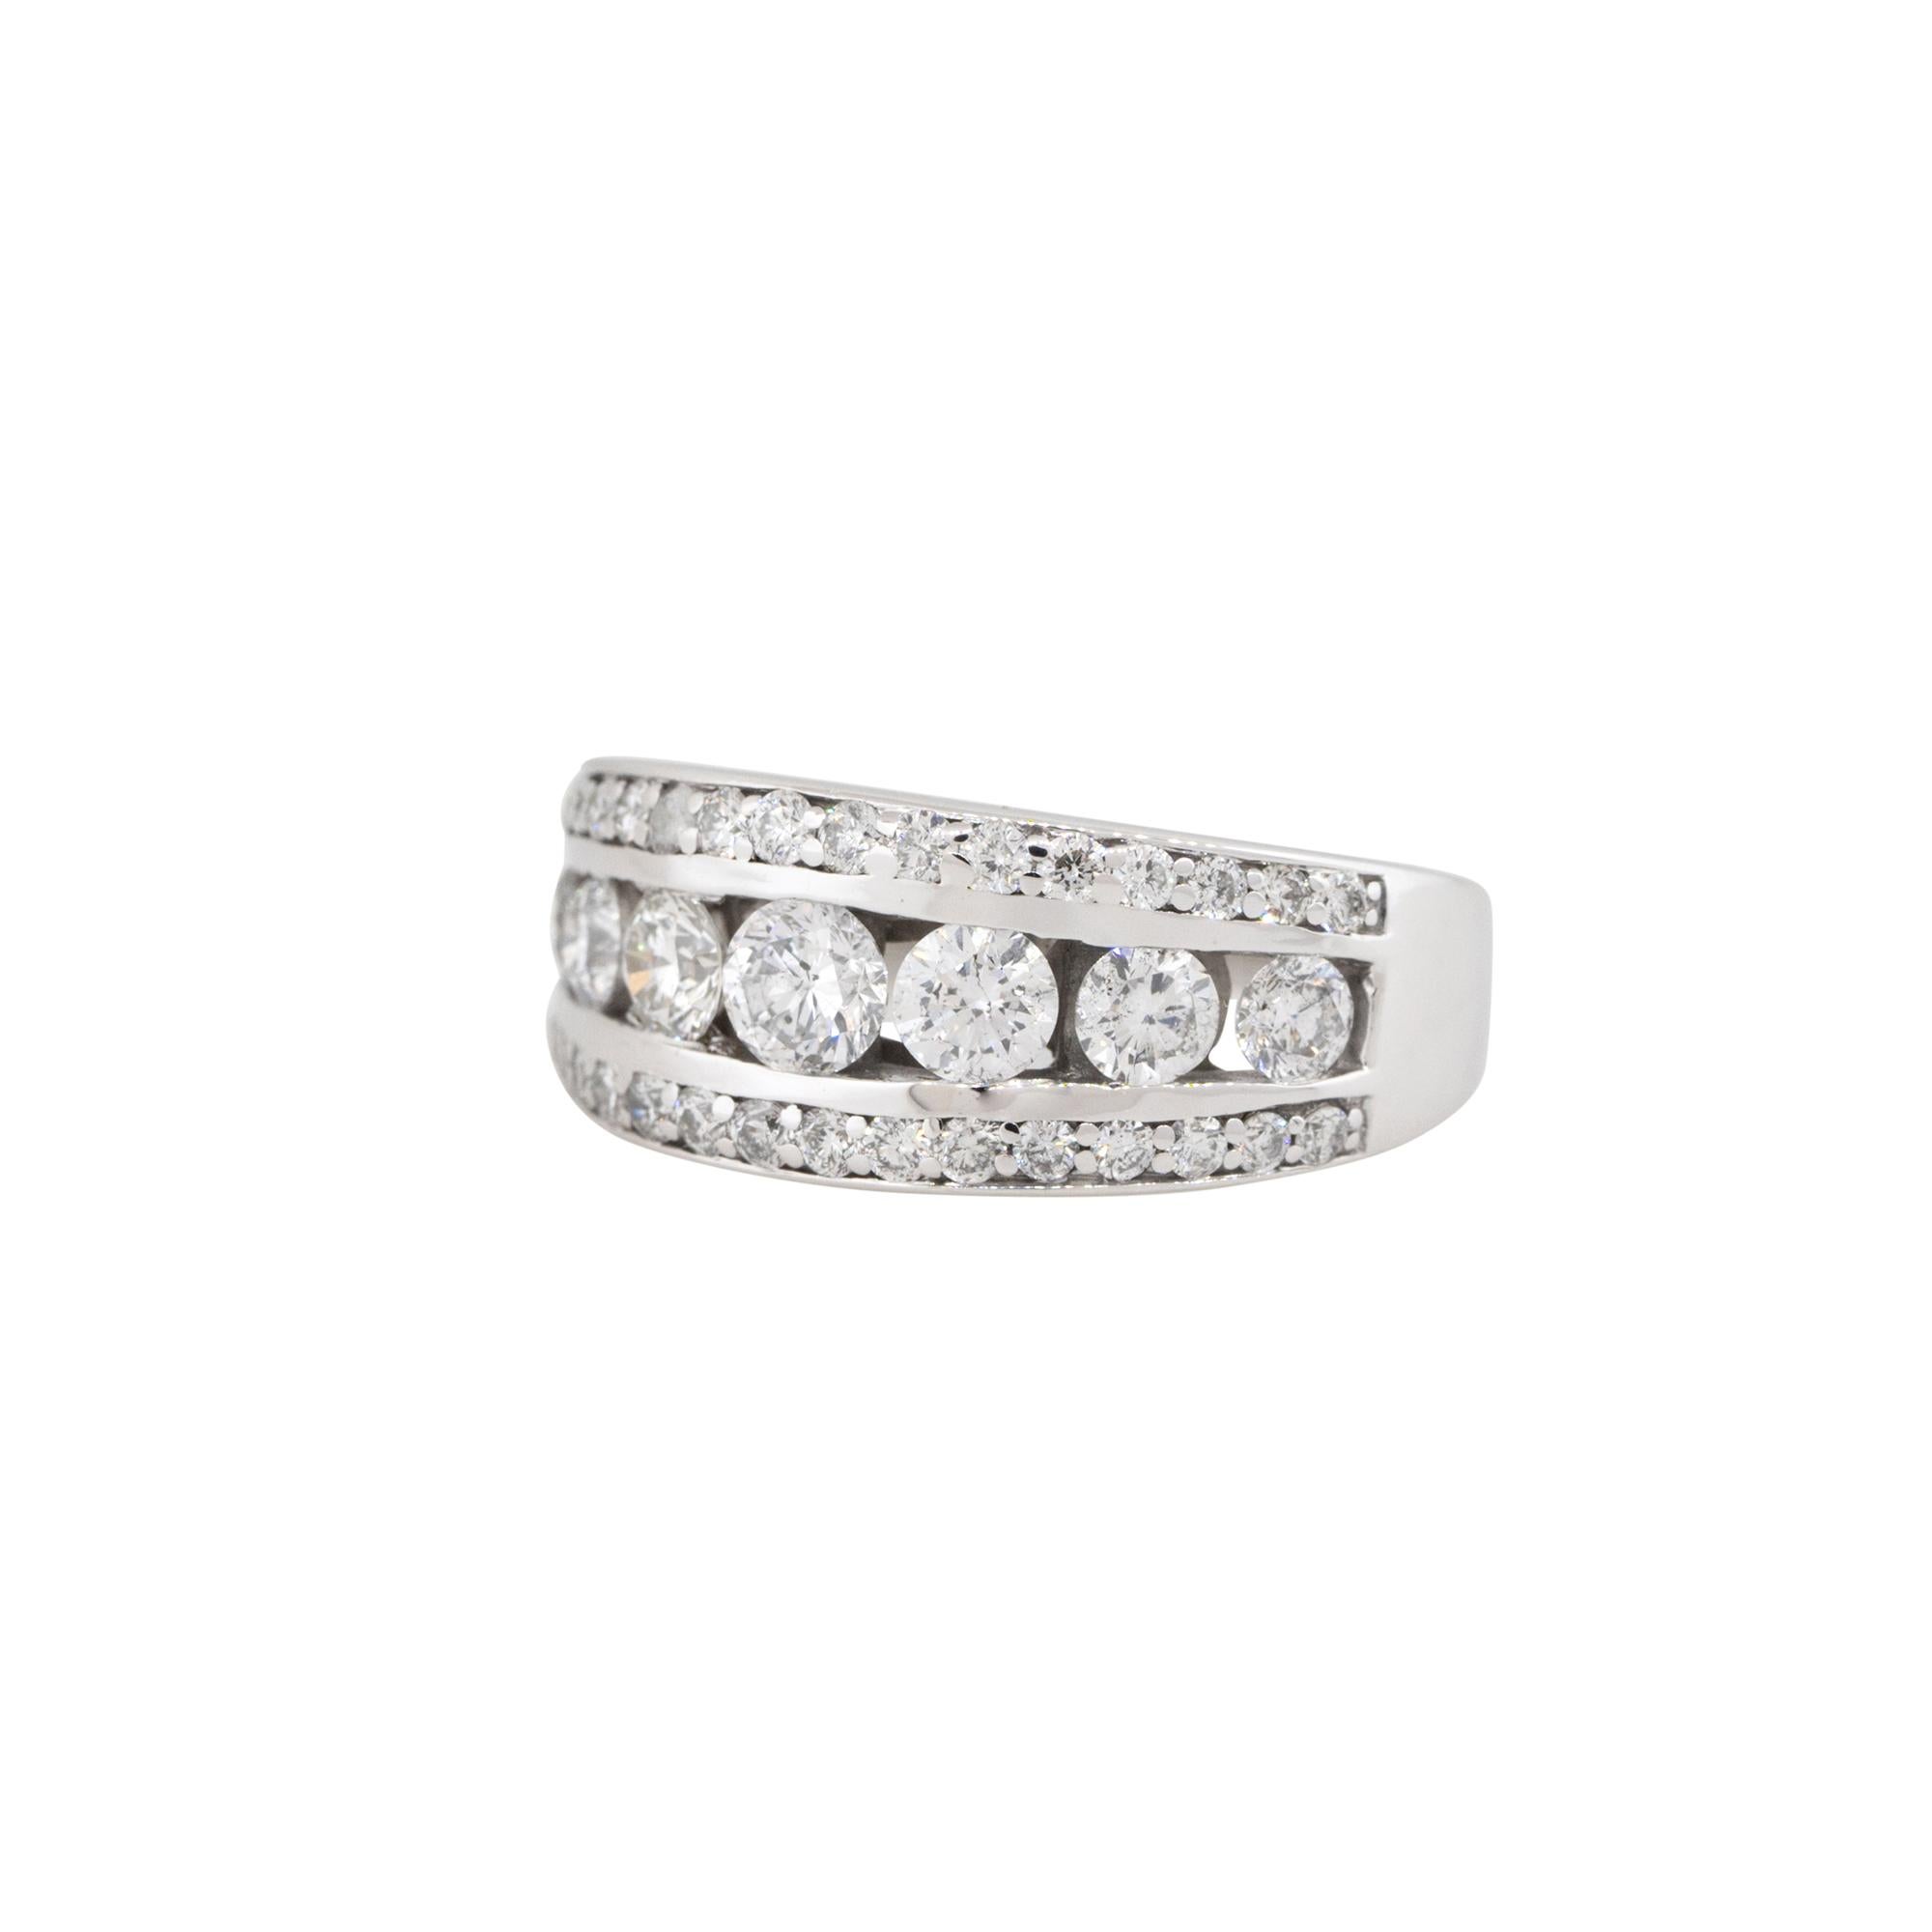 14k White Gold 1.5ctw Round Brilliant Diamond 3 Row Graduated Band

Material: 14k White Gold
Diamond Details: All Diamonds are Round Brilliant cut, weighing approximately 1.50 carats in total. There are 7 larger, graduated stones in the center,